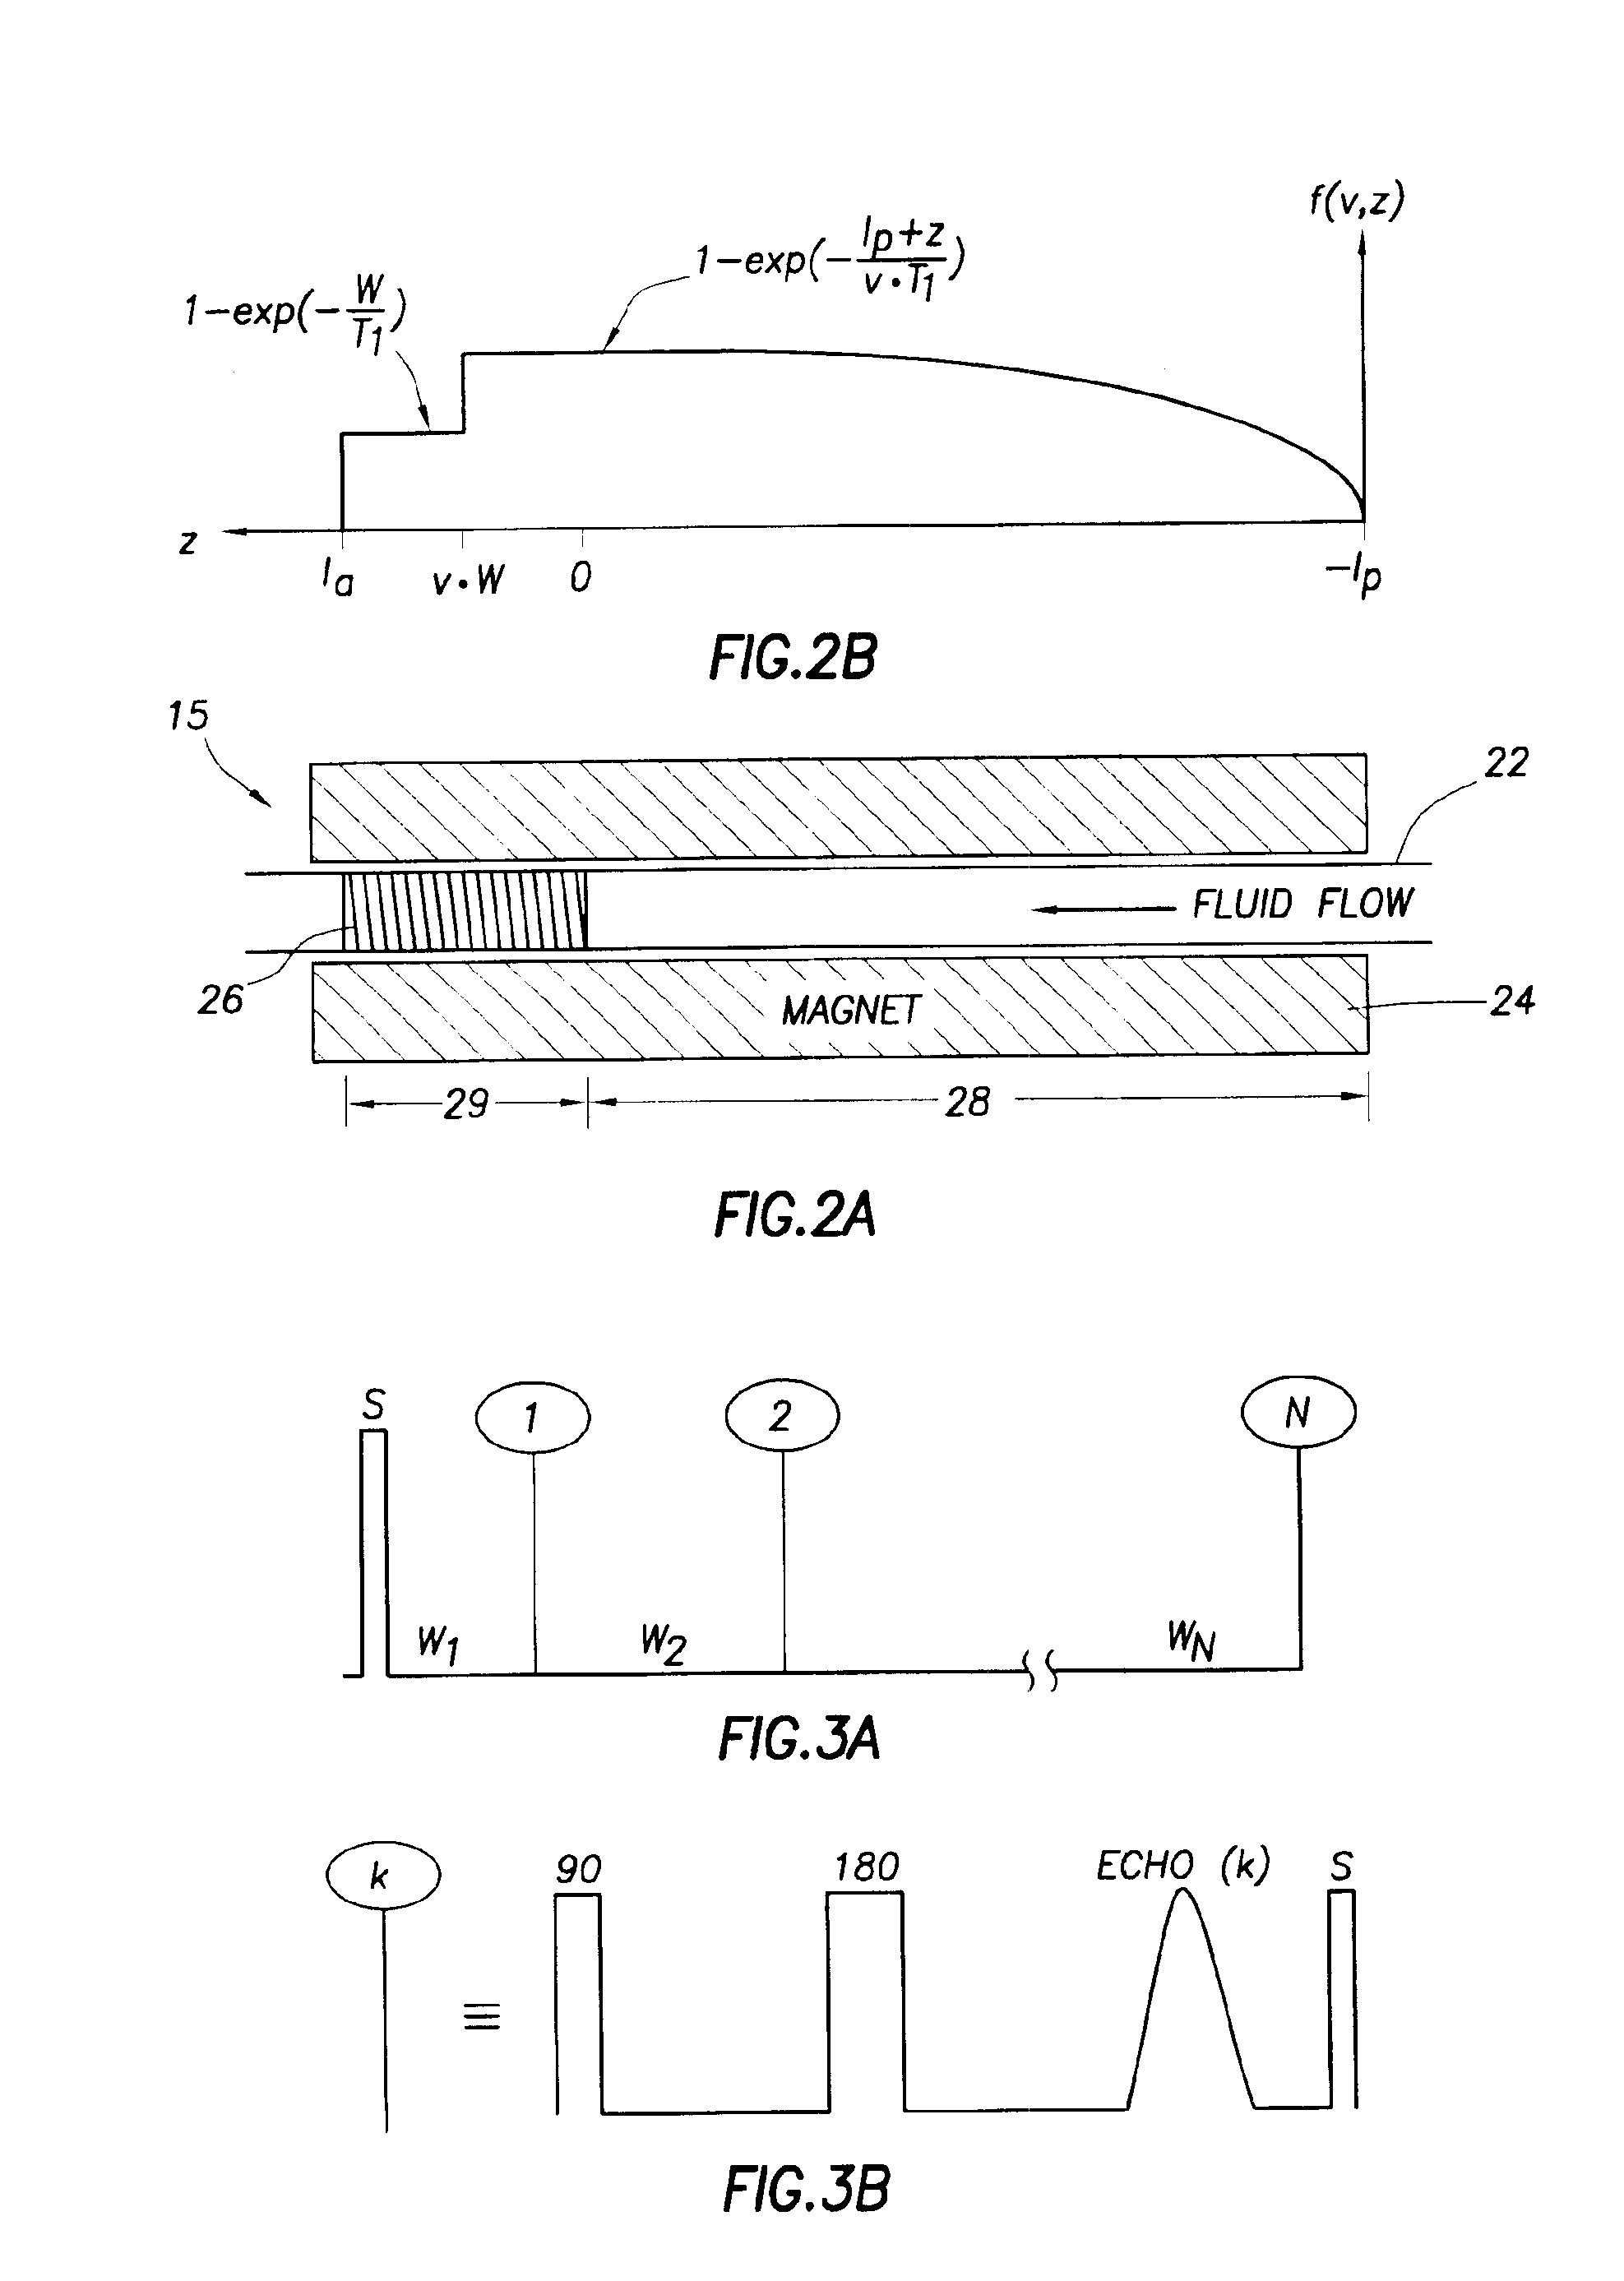 Method and apparatus for determining speed and properties of flowing fluids using NMR measurements